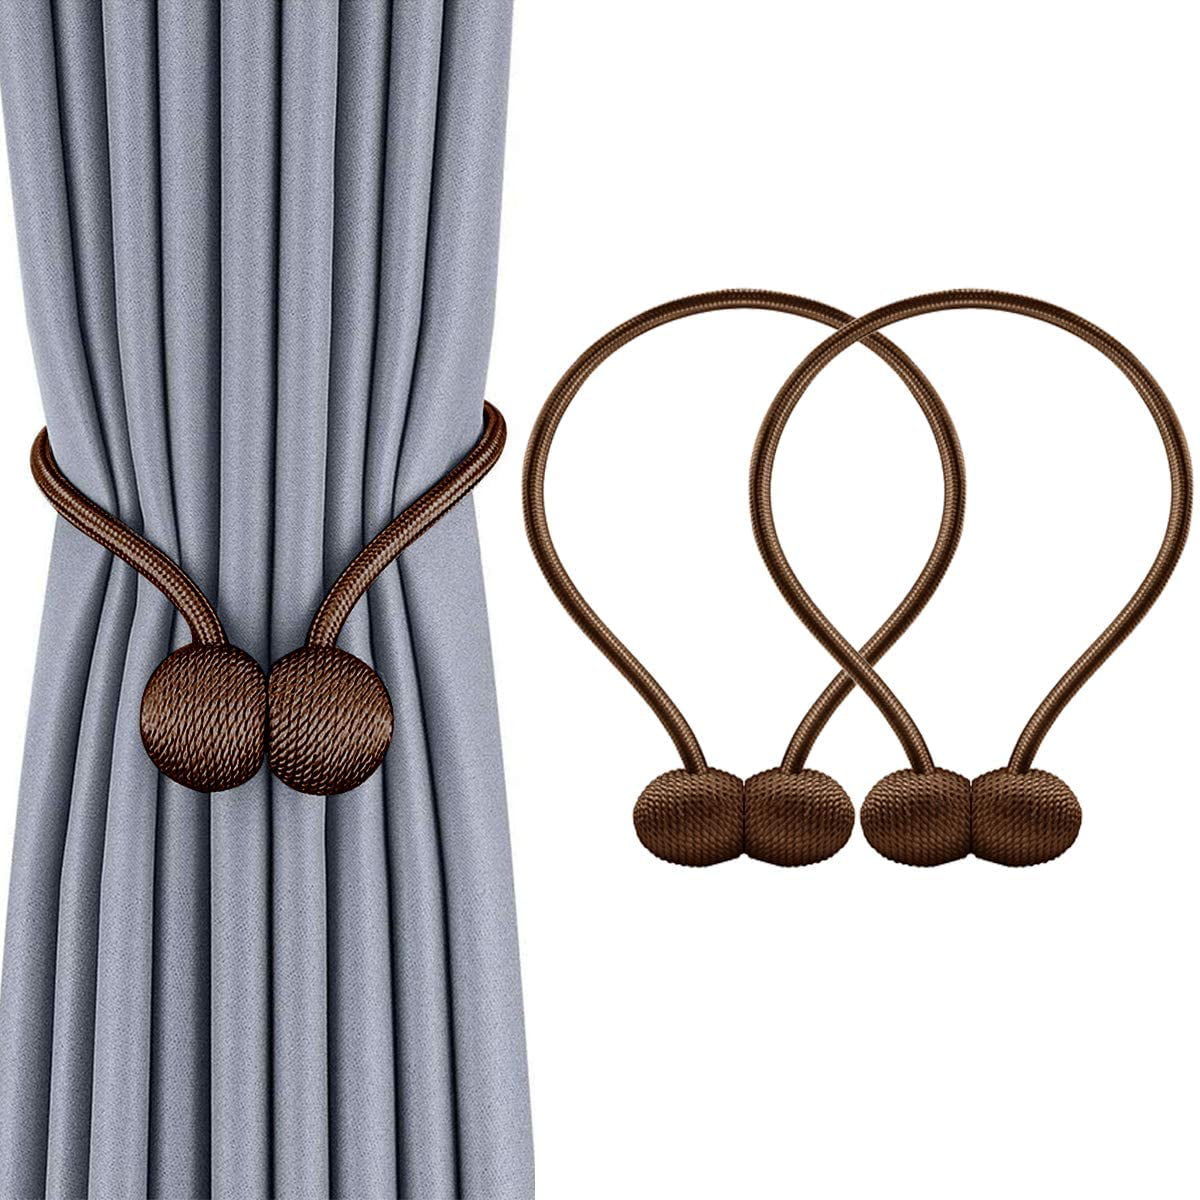 Details about   Magnetic Polyester Curtain Tieback Holder Hooks Ball Buckle Clip Home Decors US 